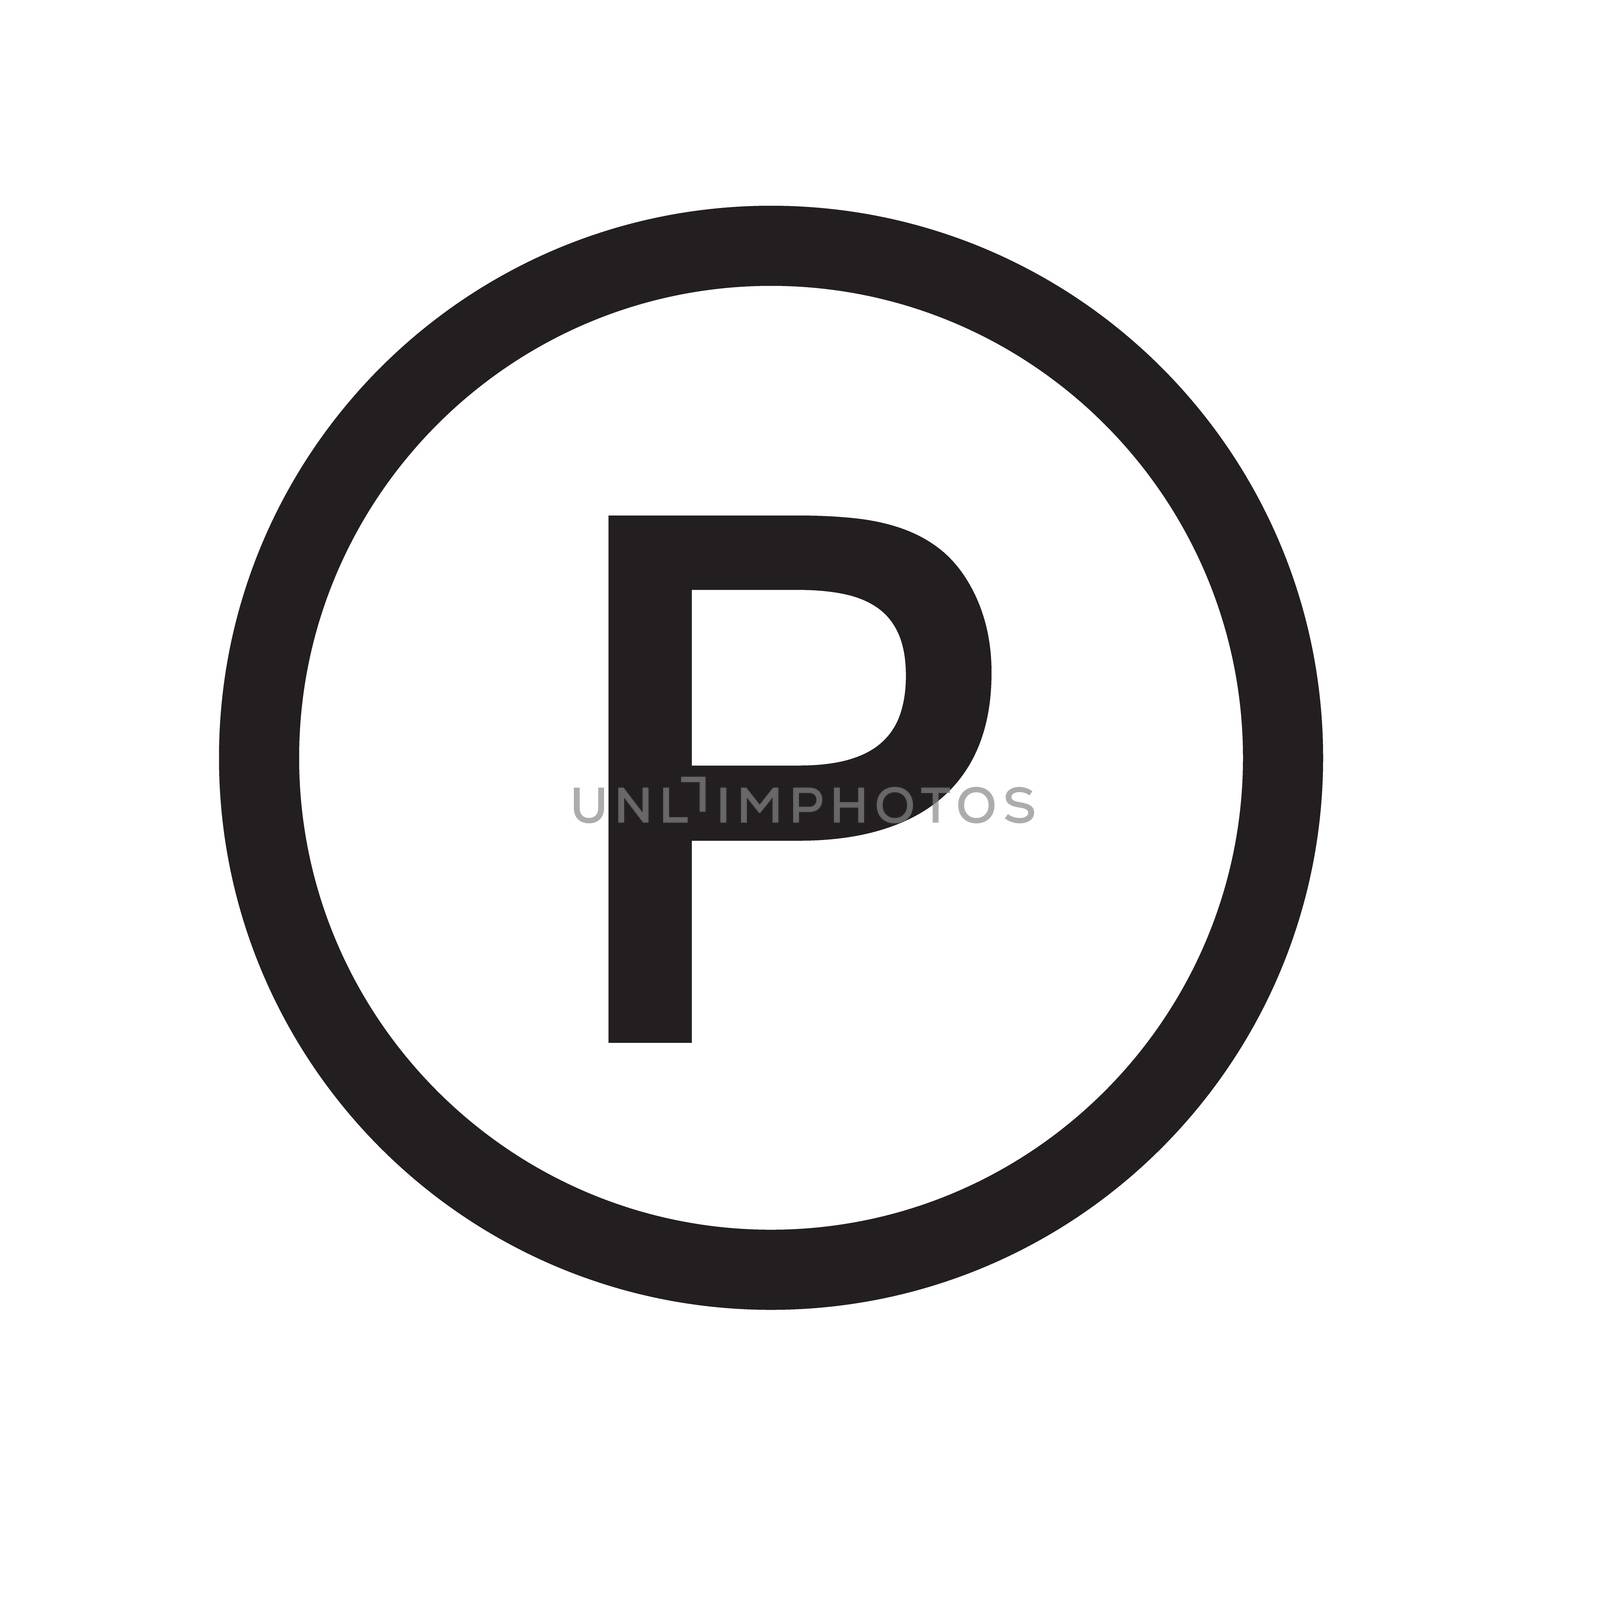 no parking icon on white background. flat style. sign prohibiting parking sign for your web site design, logo, app, UI. sign prohibiting parking symbol. no parking sign. 

